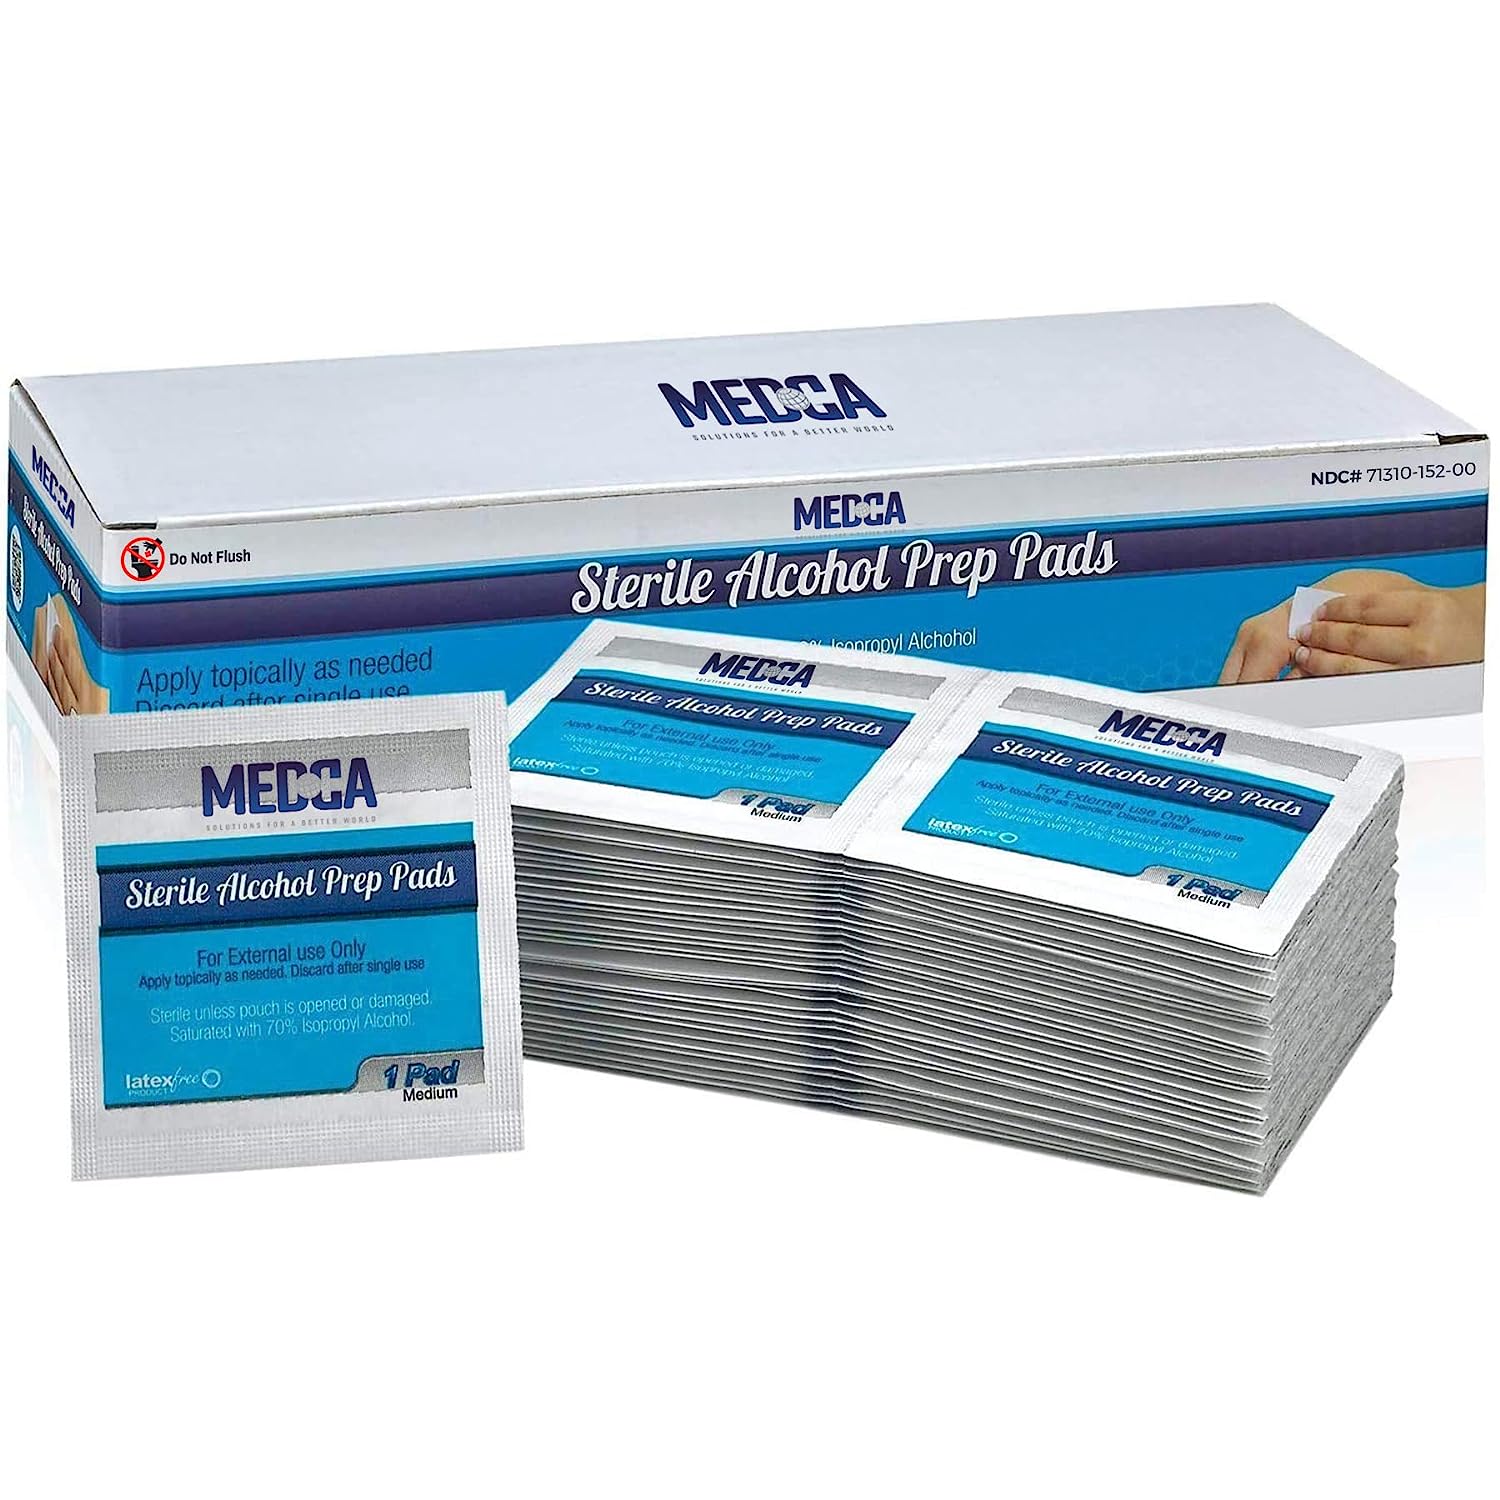 MEDca Wipes Sterile Alcohol Prep Sanitizer Swab Cotton Pads 500 Count - image 1 of 8